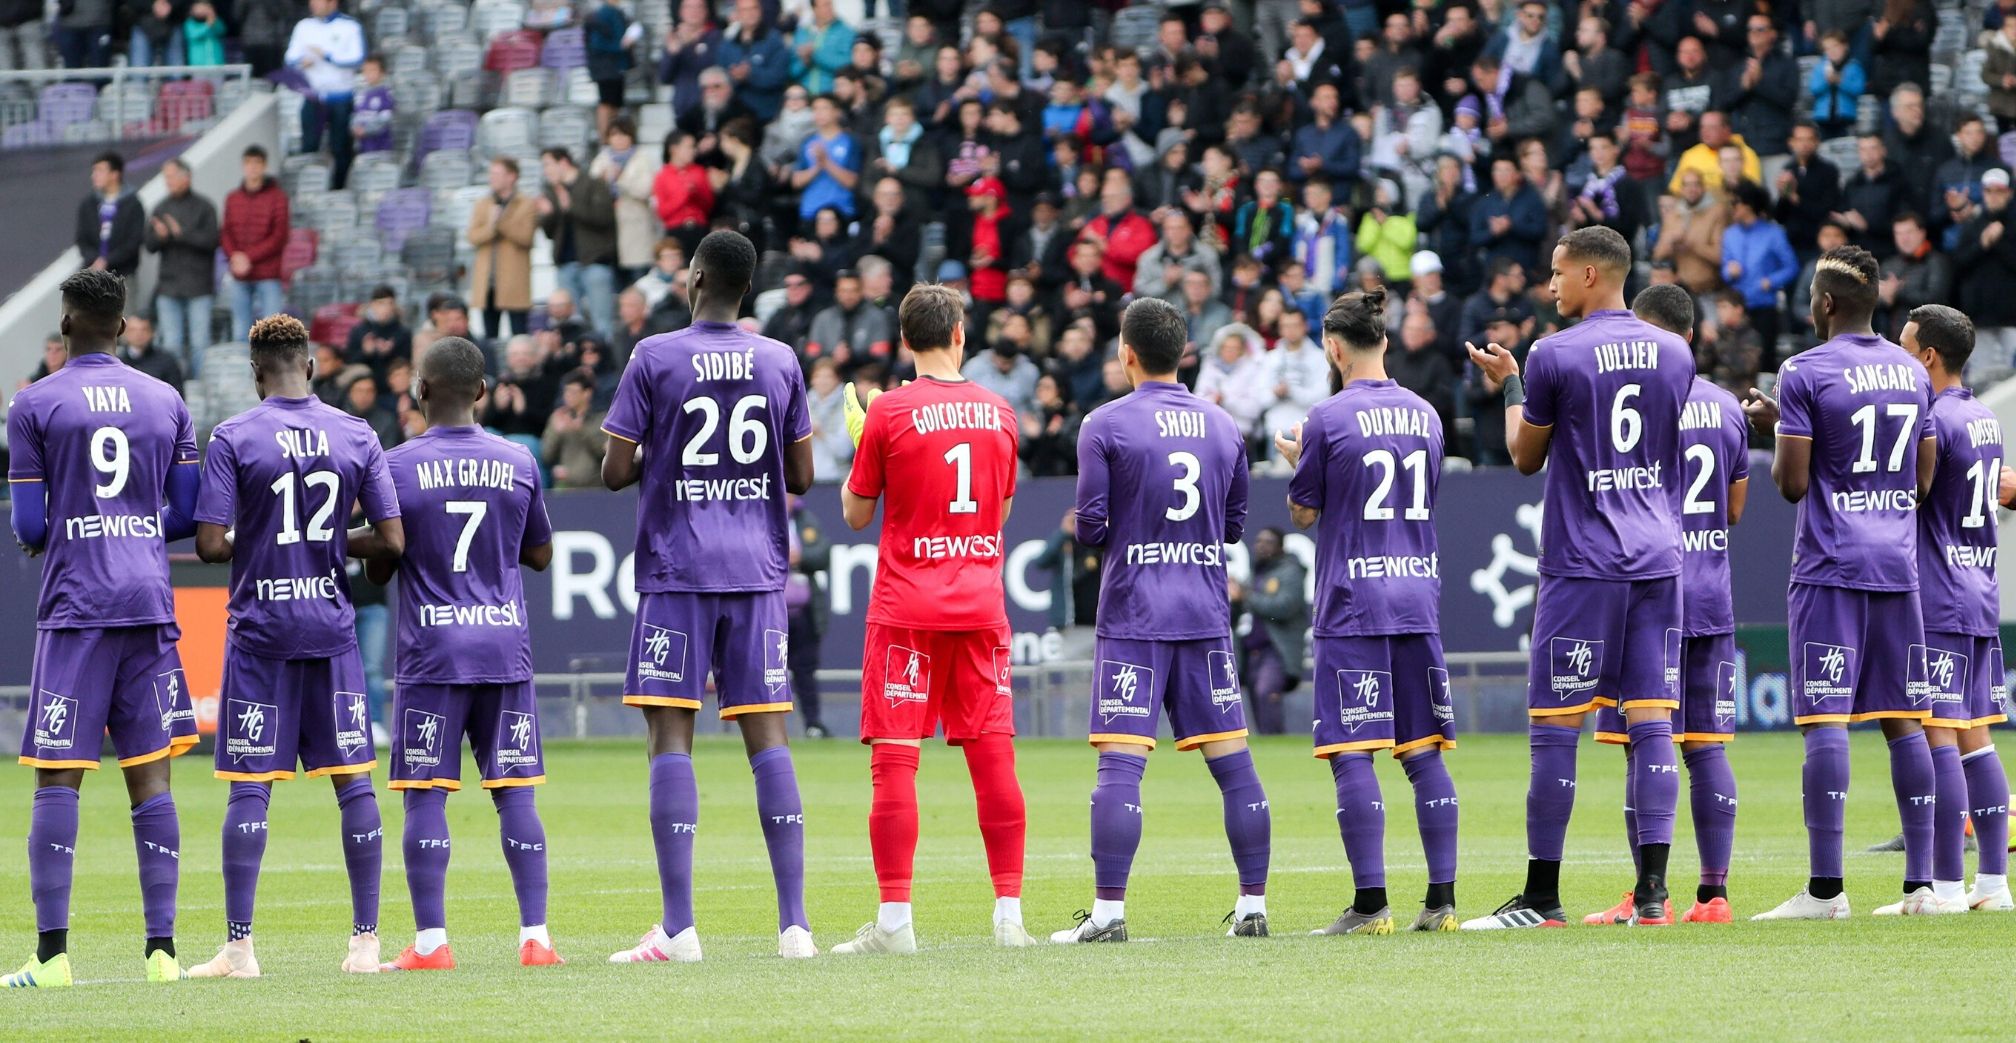 Toulouse FC opens doors to help battle COVID-19